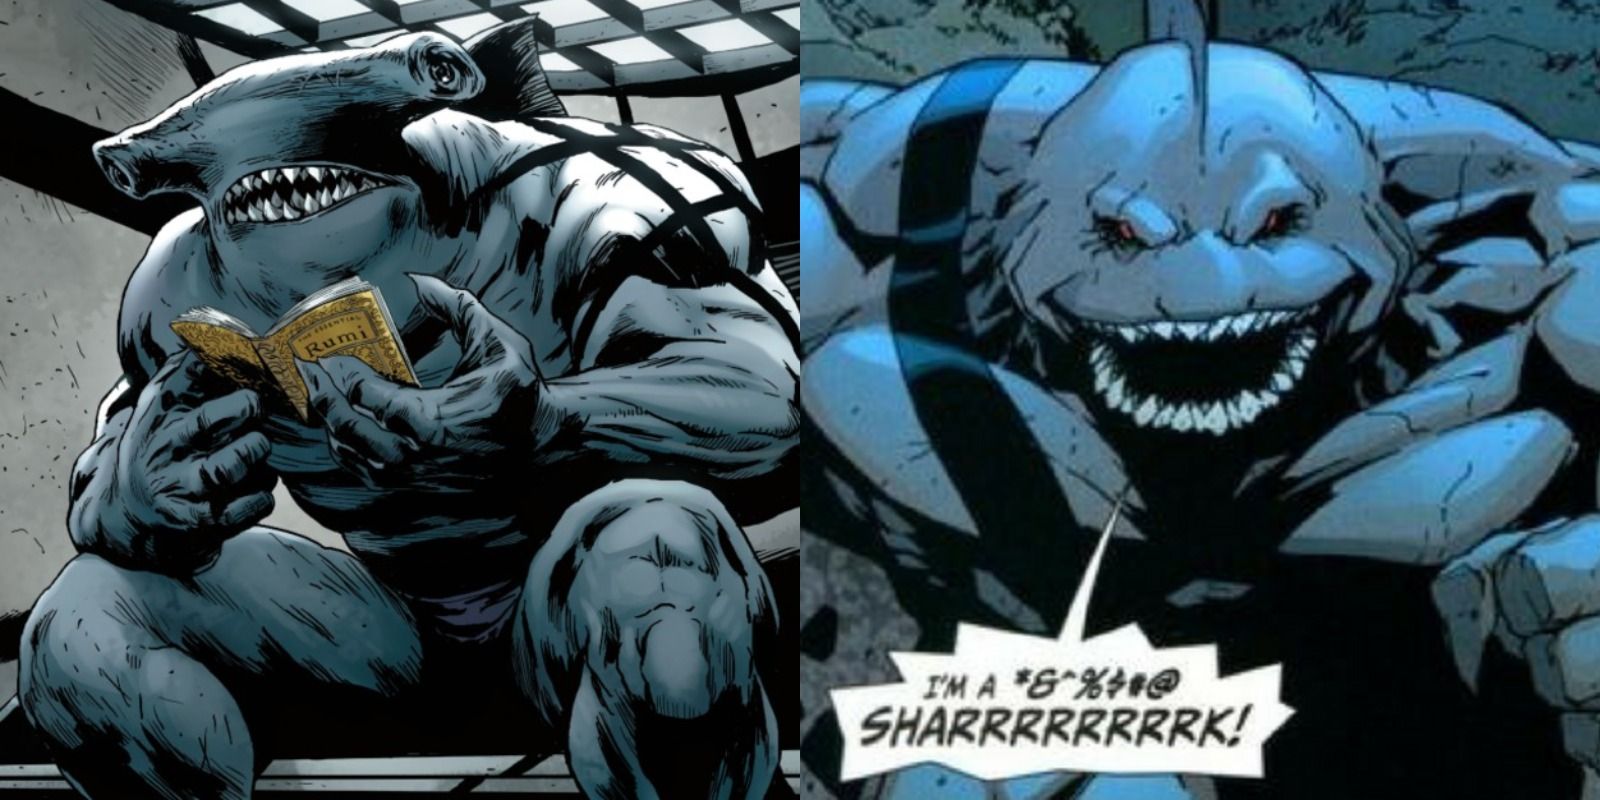 King Shark as seen in the New 52, and King Shark as seen in normal DC continuity